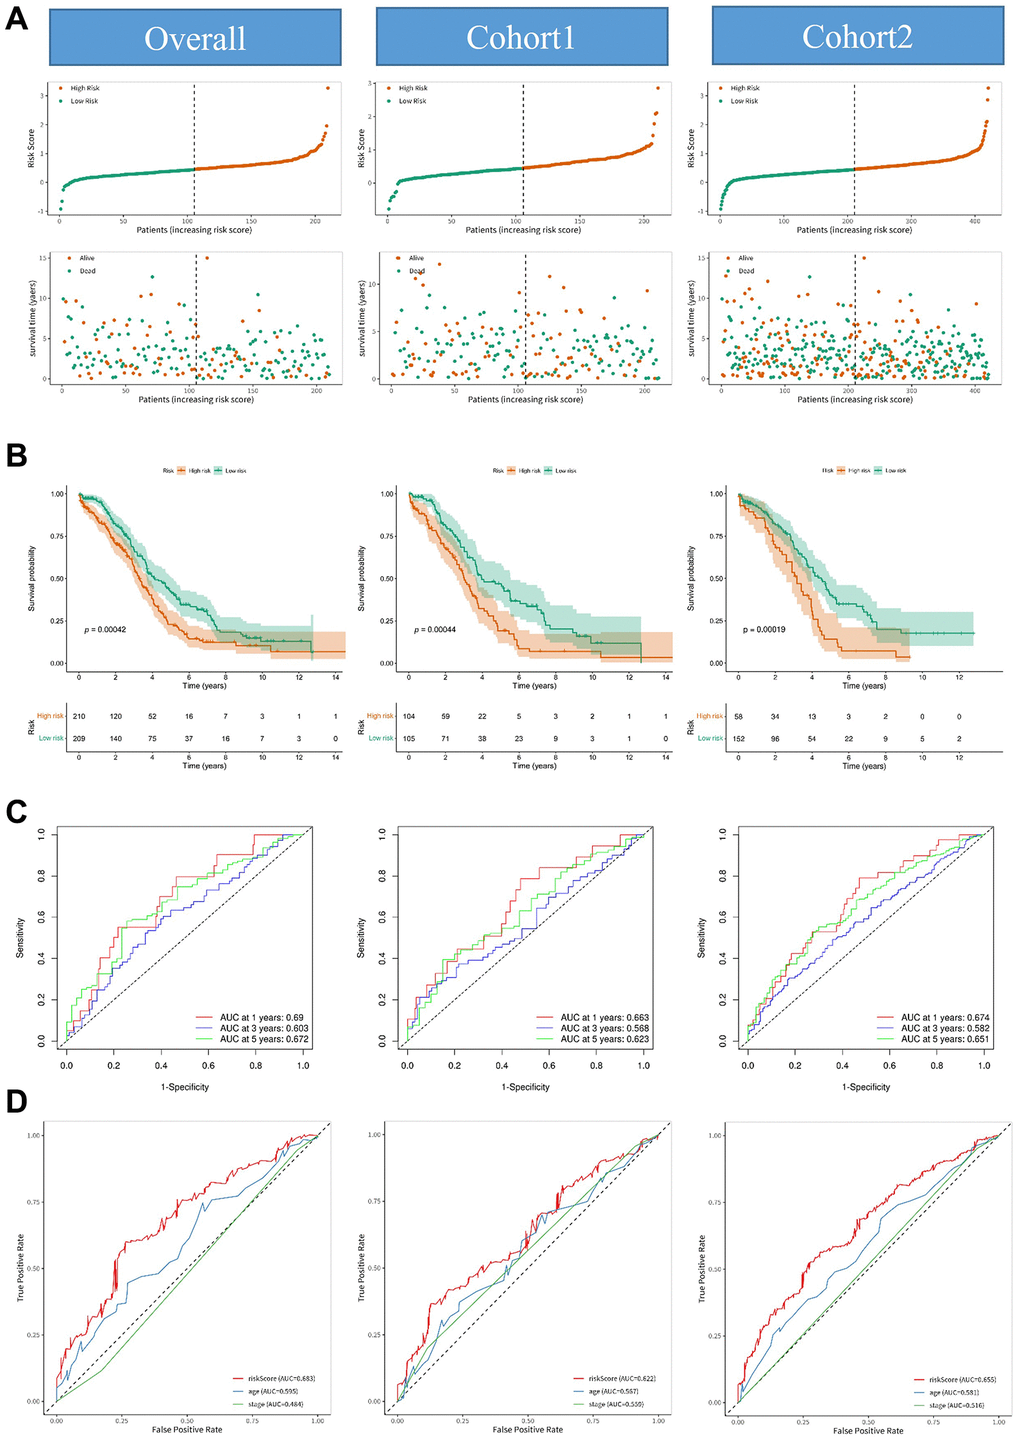 Construction and validation of the prognostic model consisting of anoikis-related lncRNAs. (A) Distribution diagrams showing the risk scores and survival status of the overall cohort, cohort 1, and cohort 2. (B) Kaplan-Meier curves illustrating significant differences in the overall survival rate between the high-risk group and low-risk group in the overall cohort, cohort 1, and cohort 2. (C) ROC curves depicting the predictive performance of the risk model for 1-year, 3-year, and 5-year overall survival in the overall cohort, cohort 1, and cohort 2. (D) ROC curves comparing the AUC (area under the curve) values of the risk score, age, and stage in the overall cohort, cohort 1, and cohort 2.